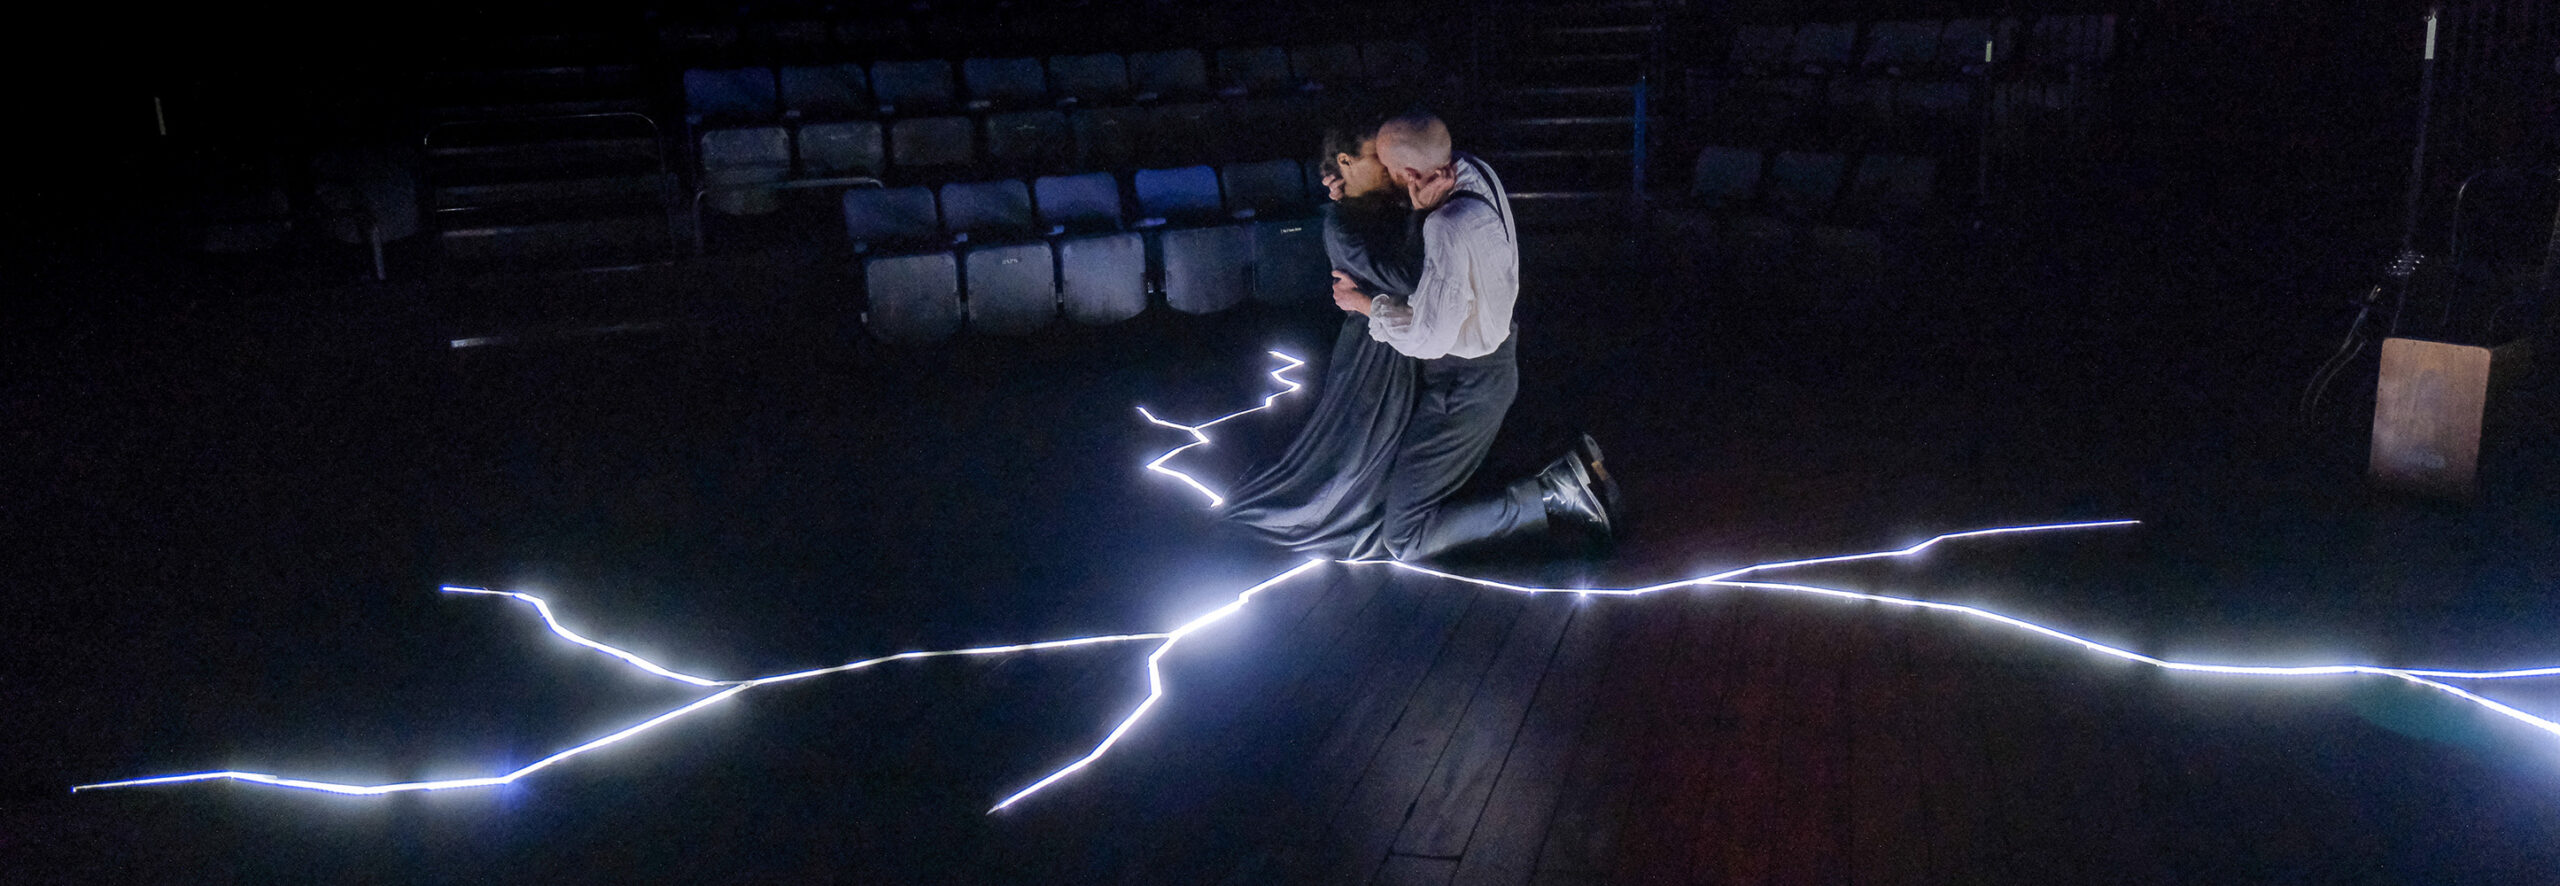 theatre performance image: Jane Eyre and Rochester embracing at the centre of a lightening bolt on the stage floor